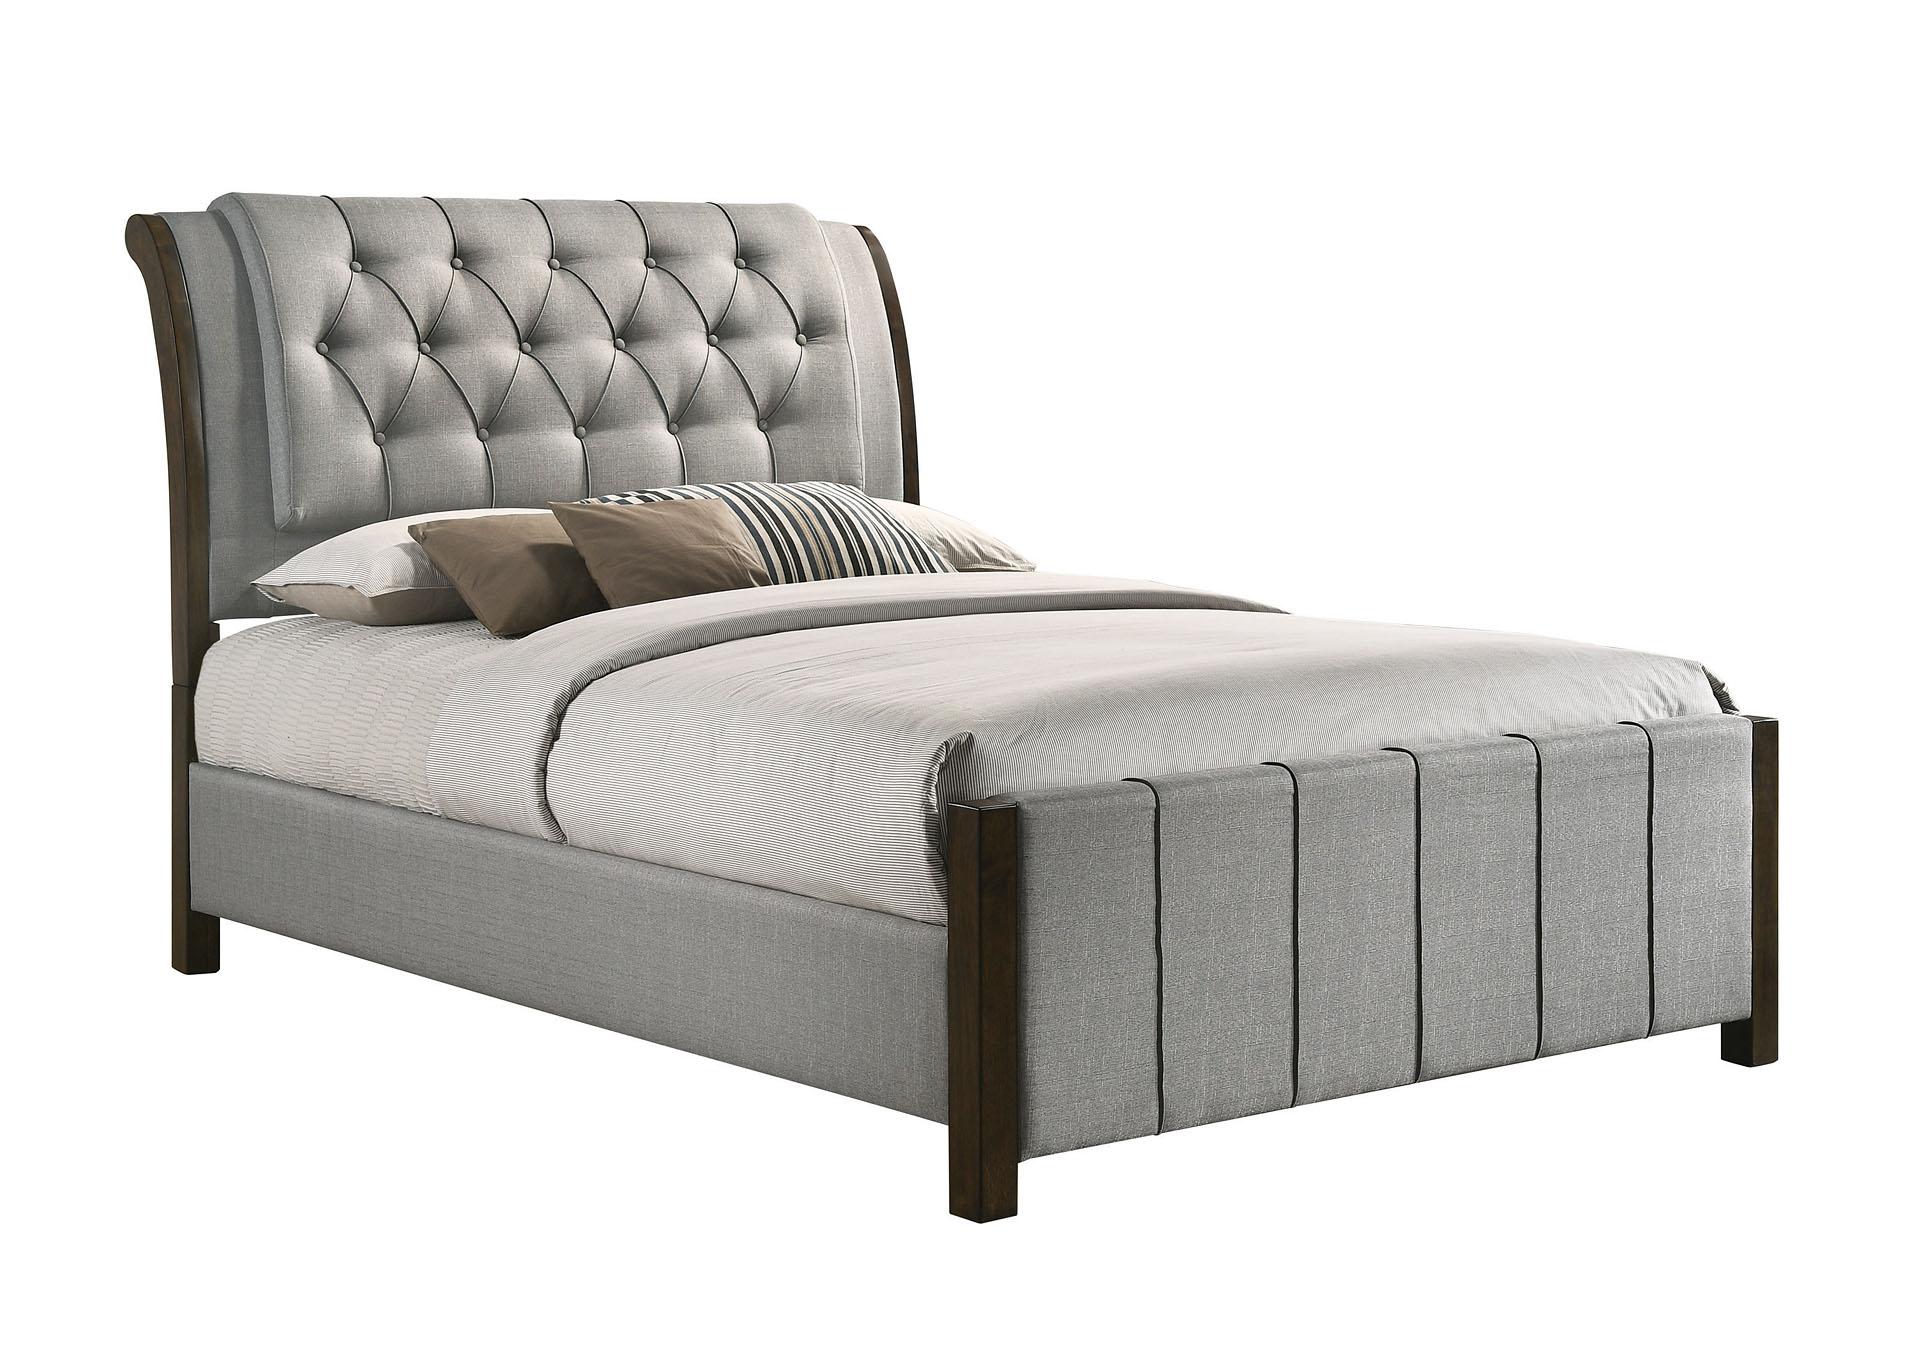 Natural Gray Full Bed,InStore Products